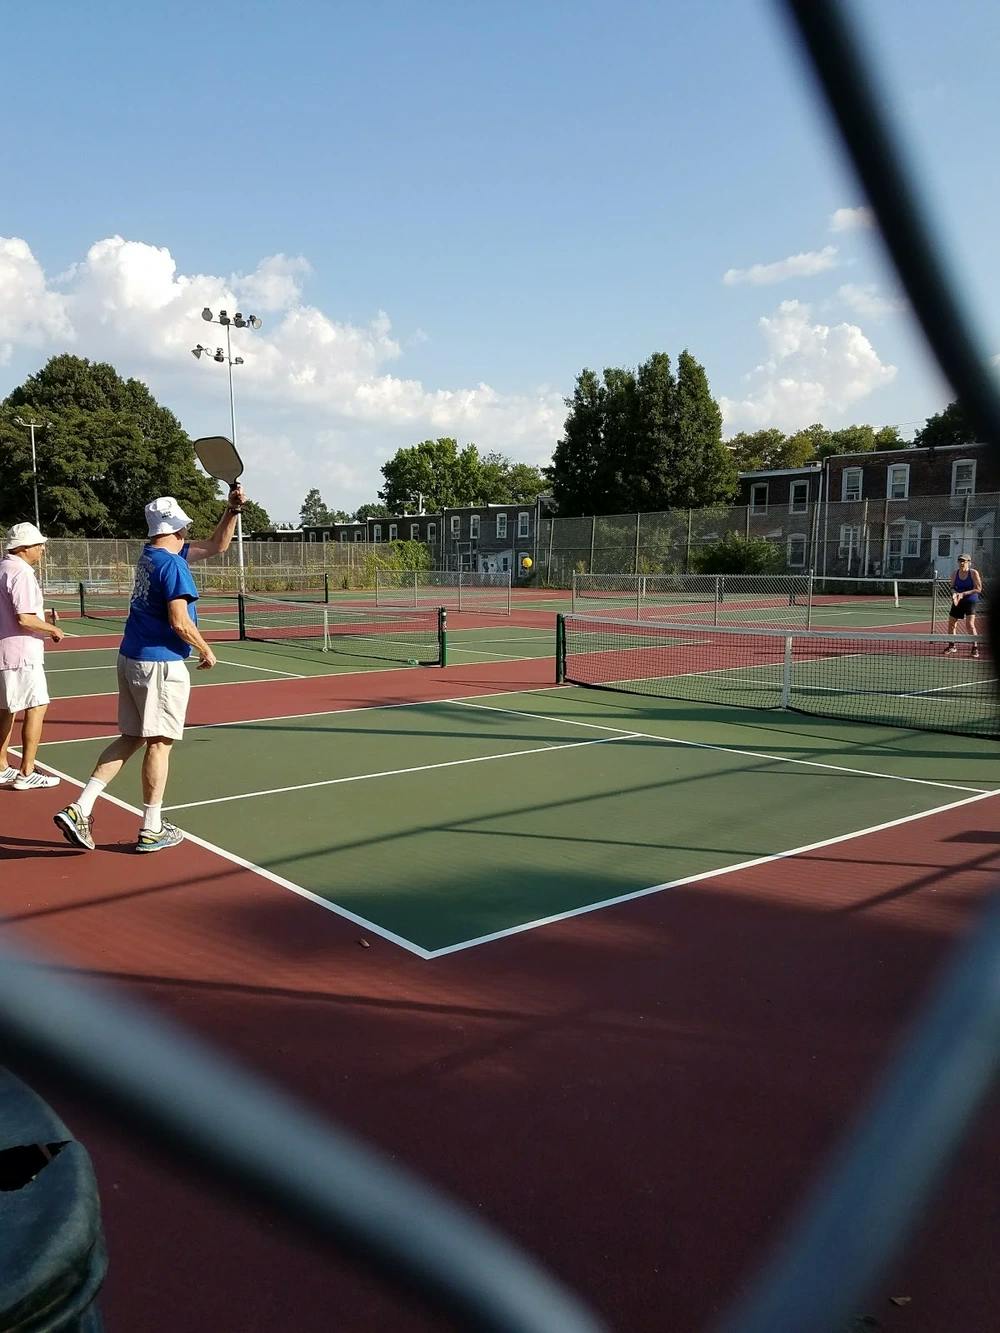 Water Tower Tennis & Pickleball Courts